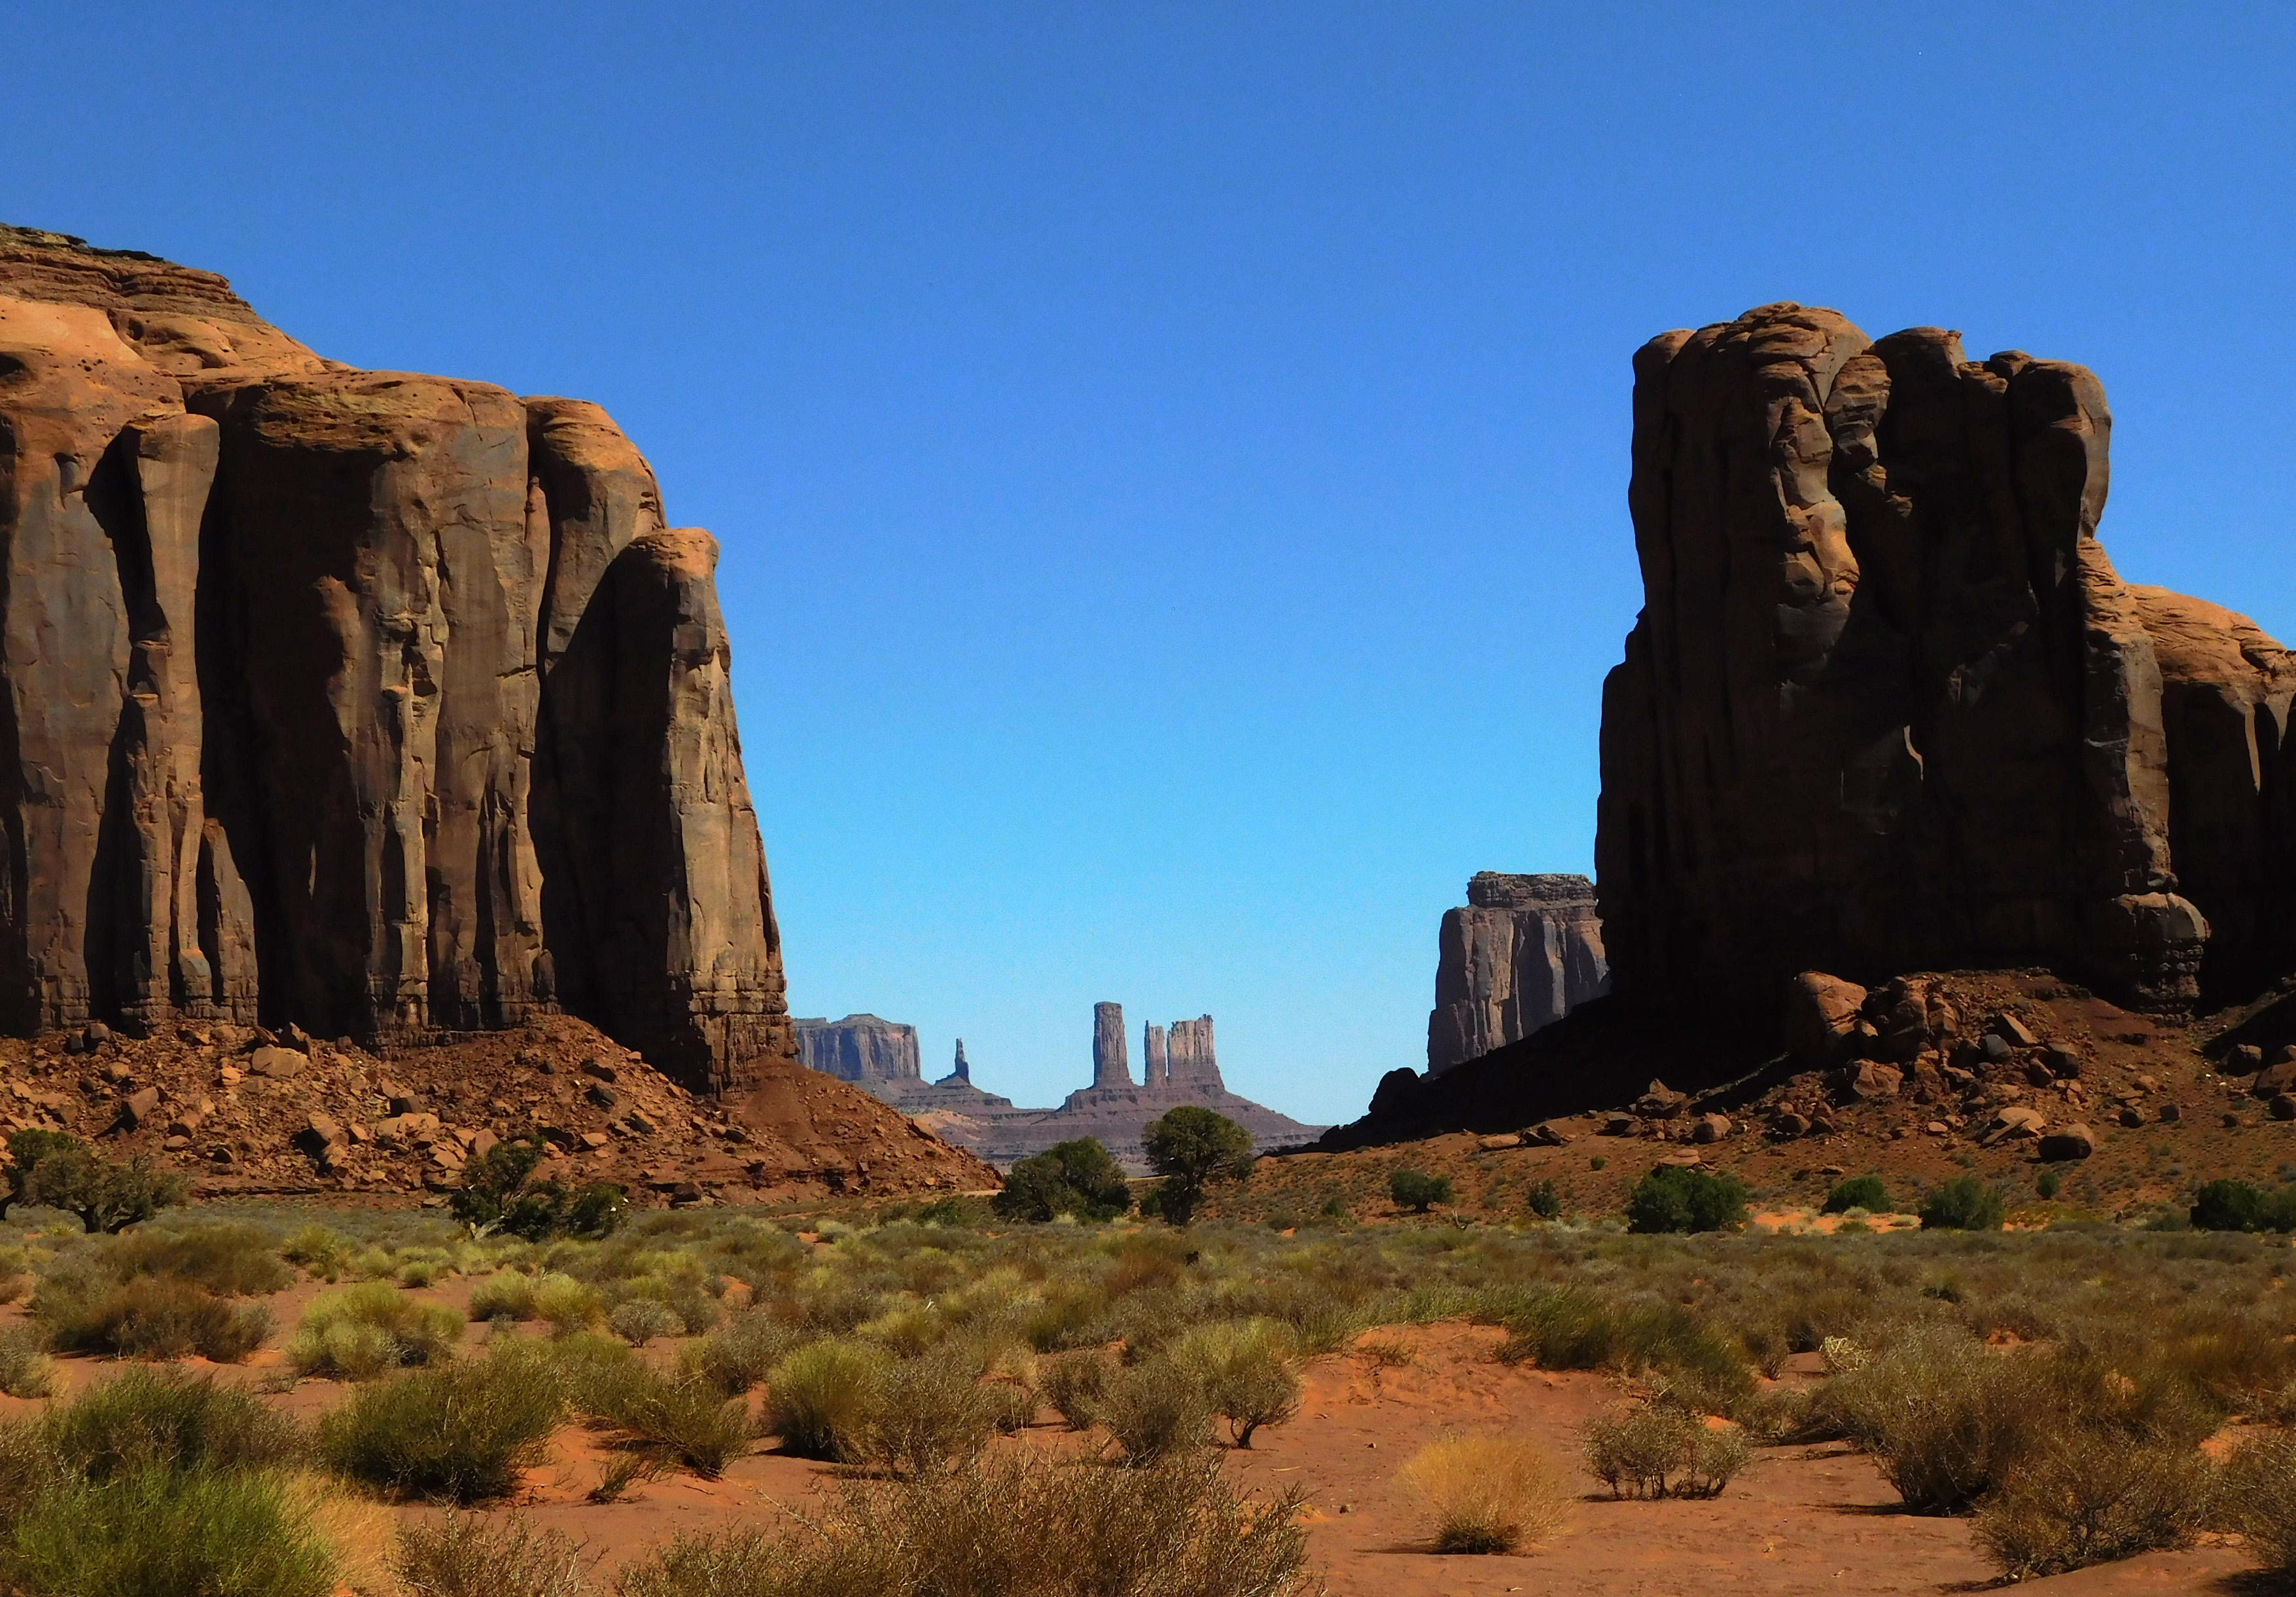 Large rock formations in the desert